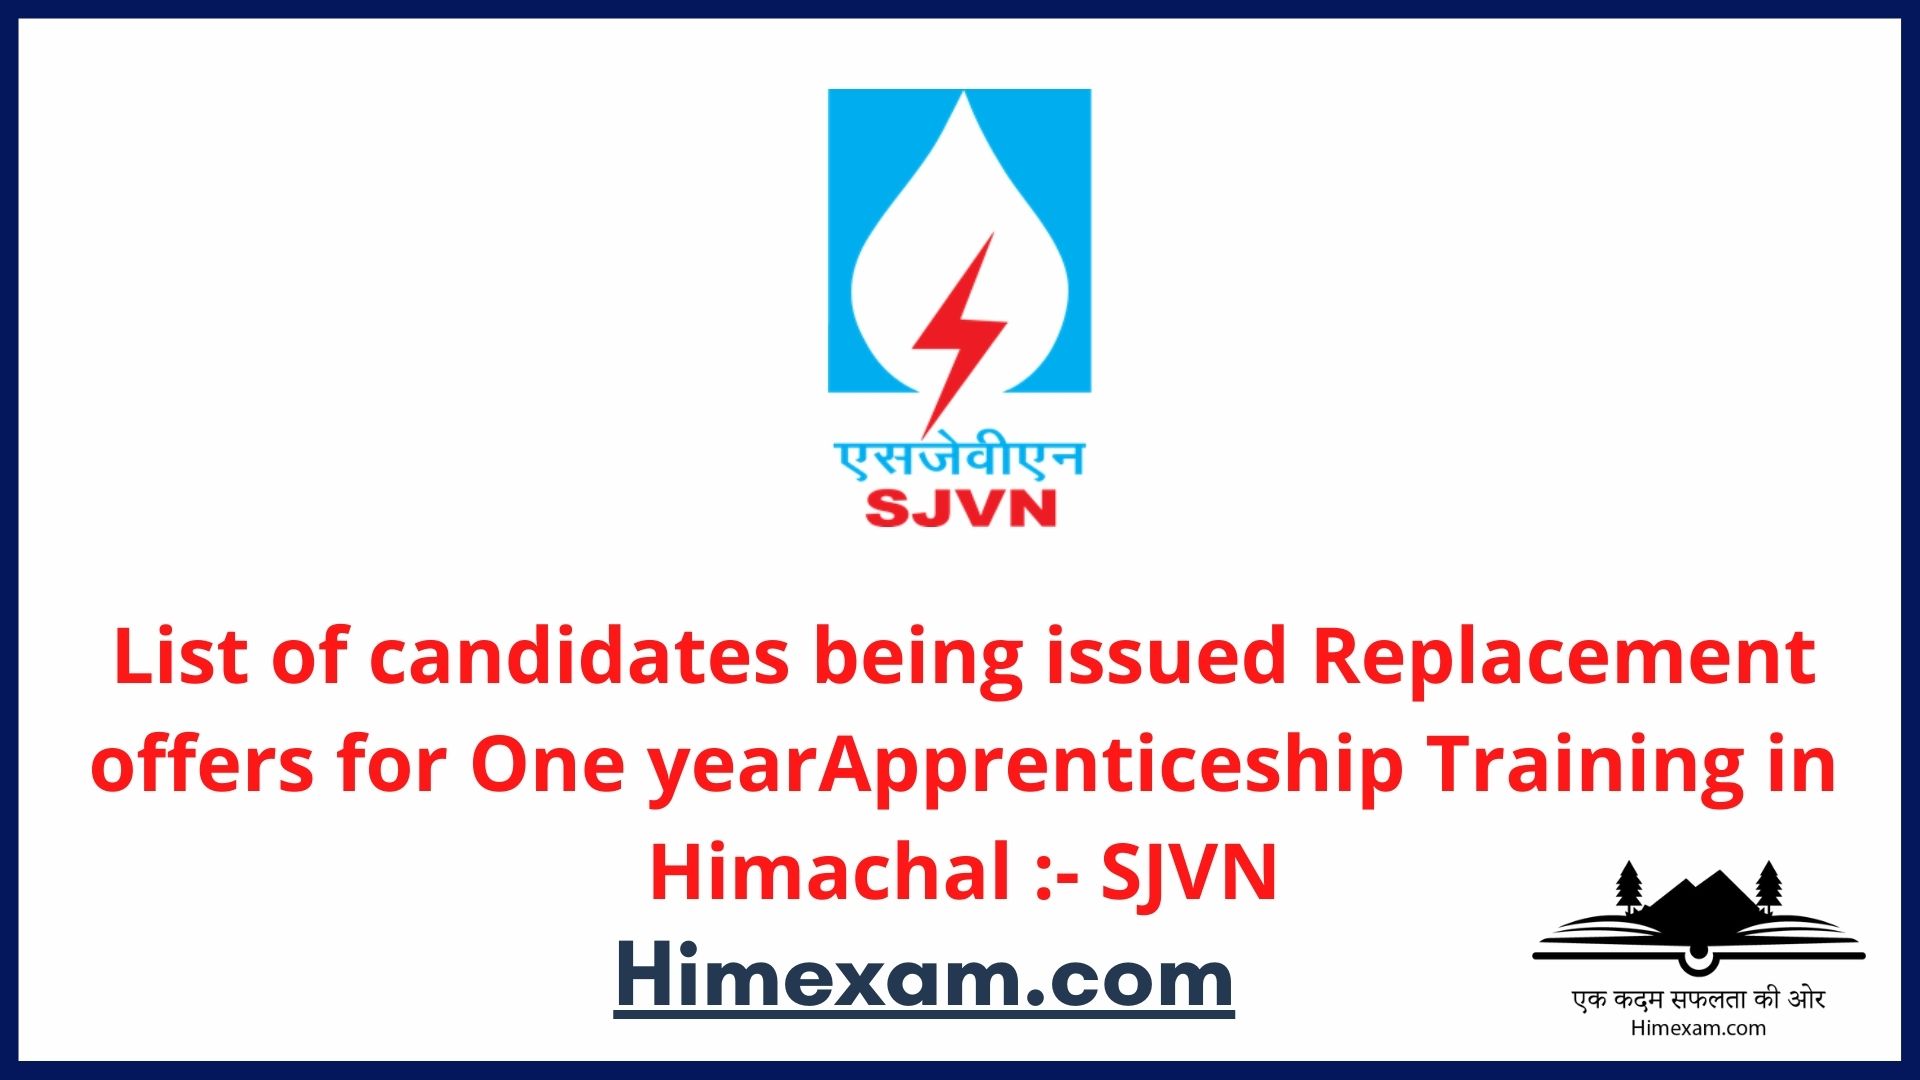 List of candidates being issued Replacement offers for One yearApprenticeship Training in Himachal :- SJVN